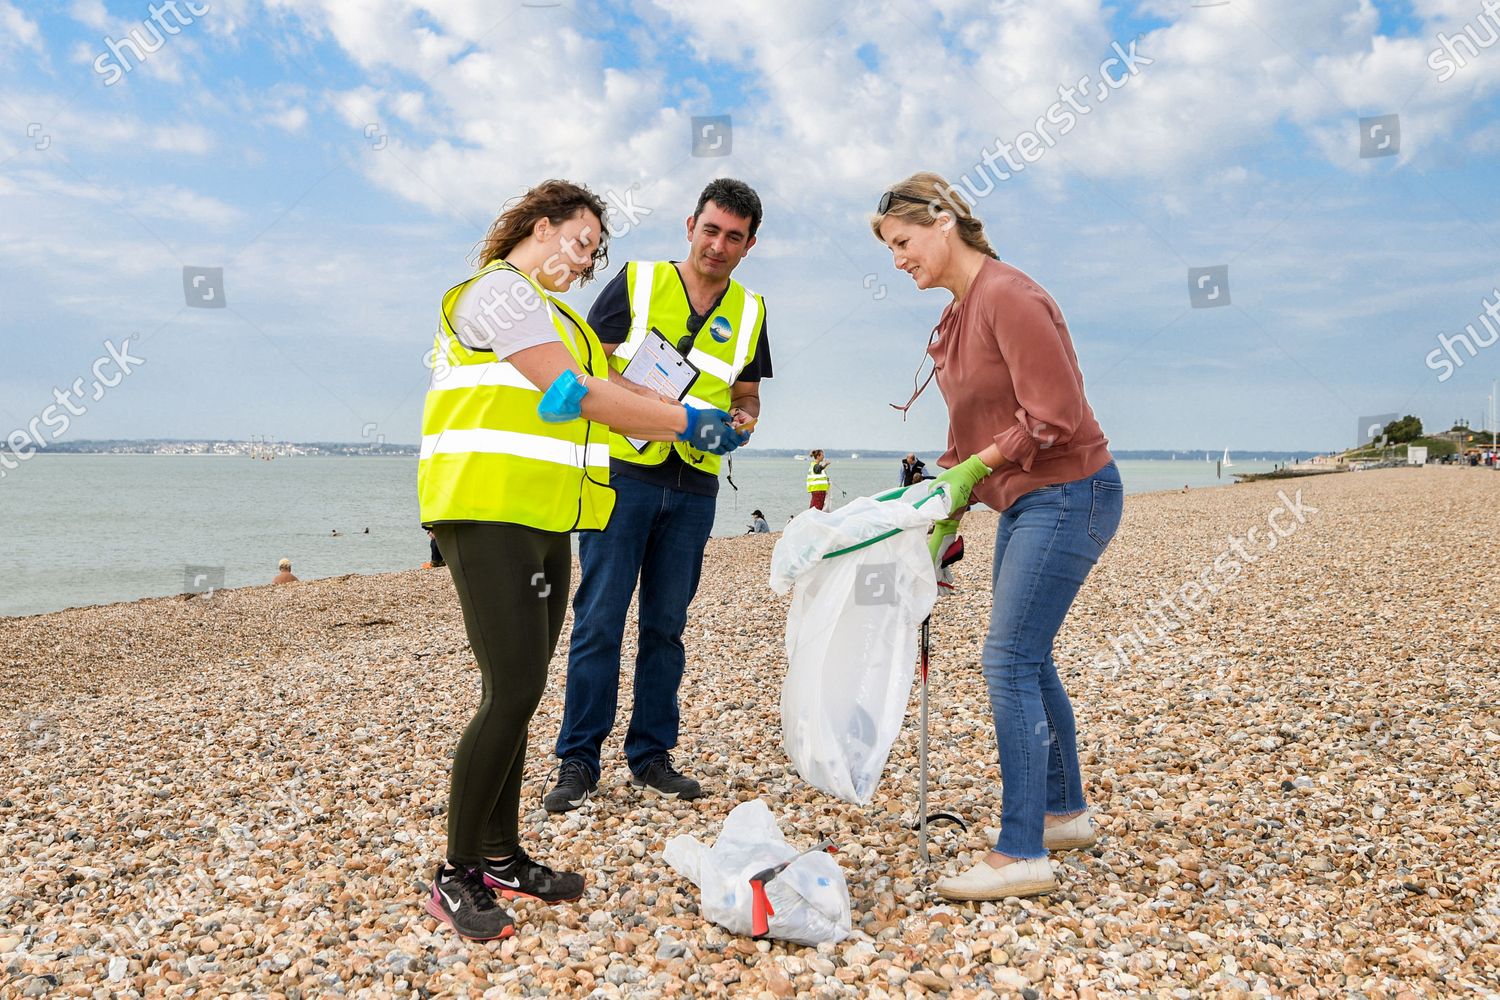 prince-edward-and-sophie-countess-of-wessex-great-british-beach-clean-southsea-beach-portsmouth-uk-shutterstock-editorial-10782998aj.jpg